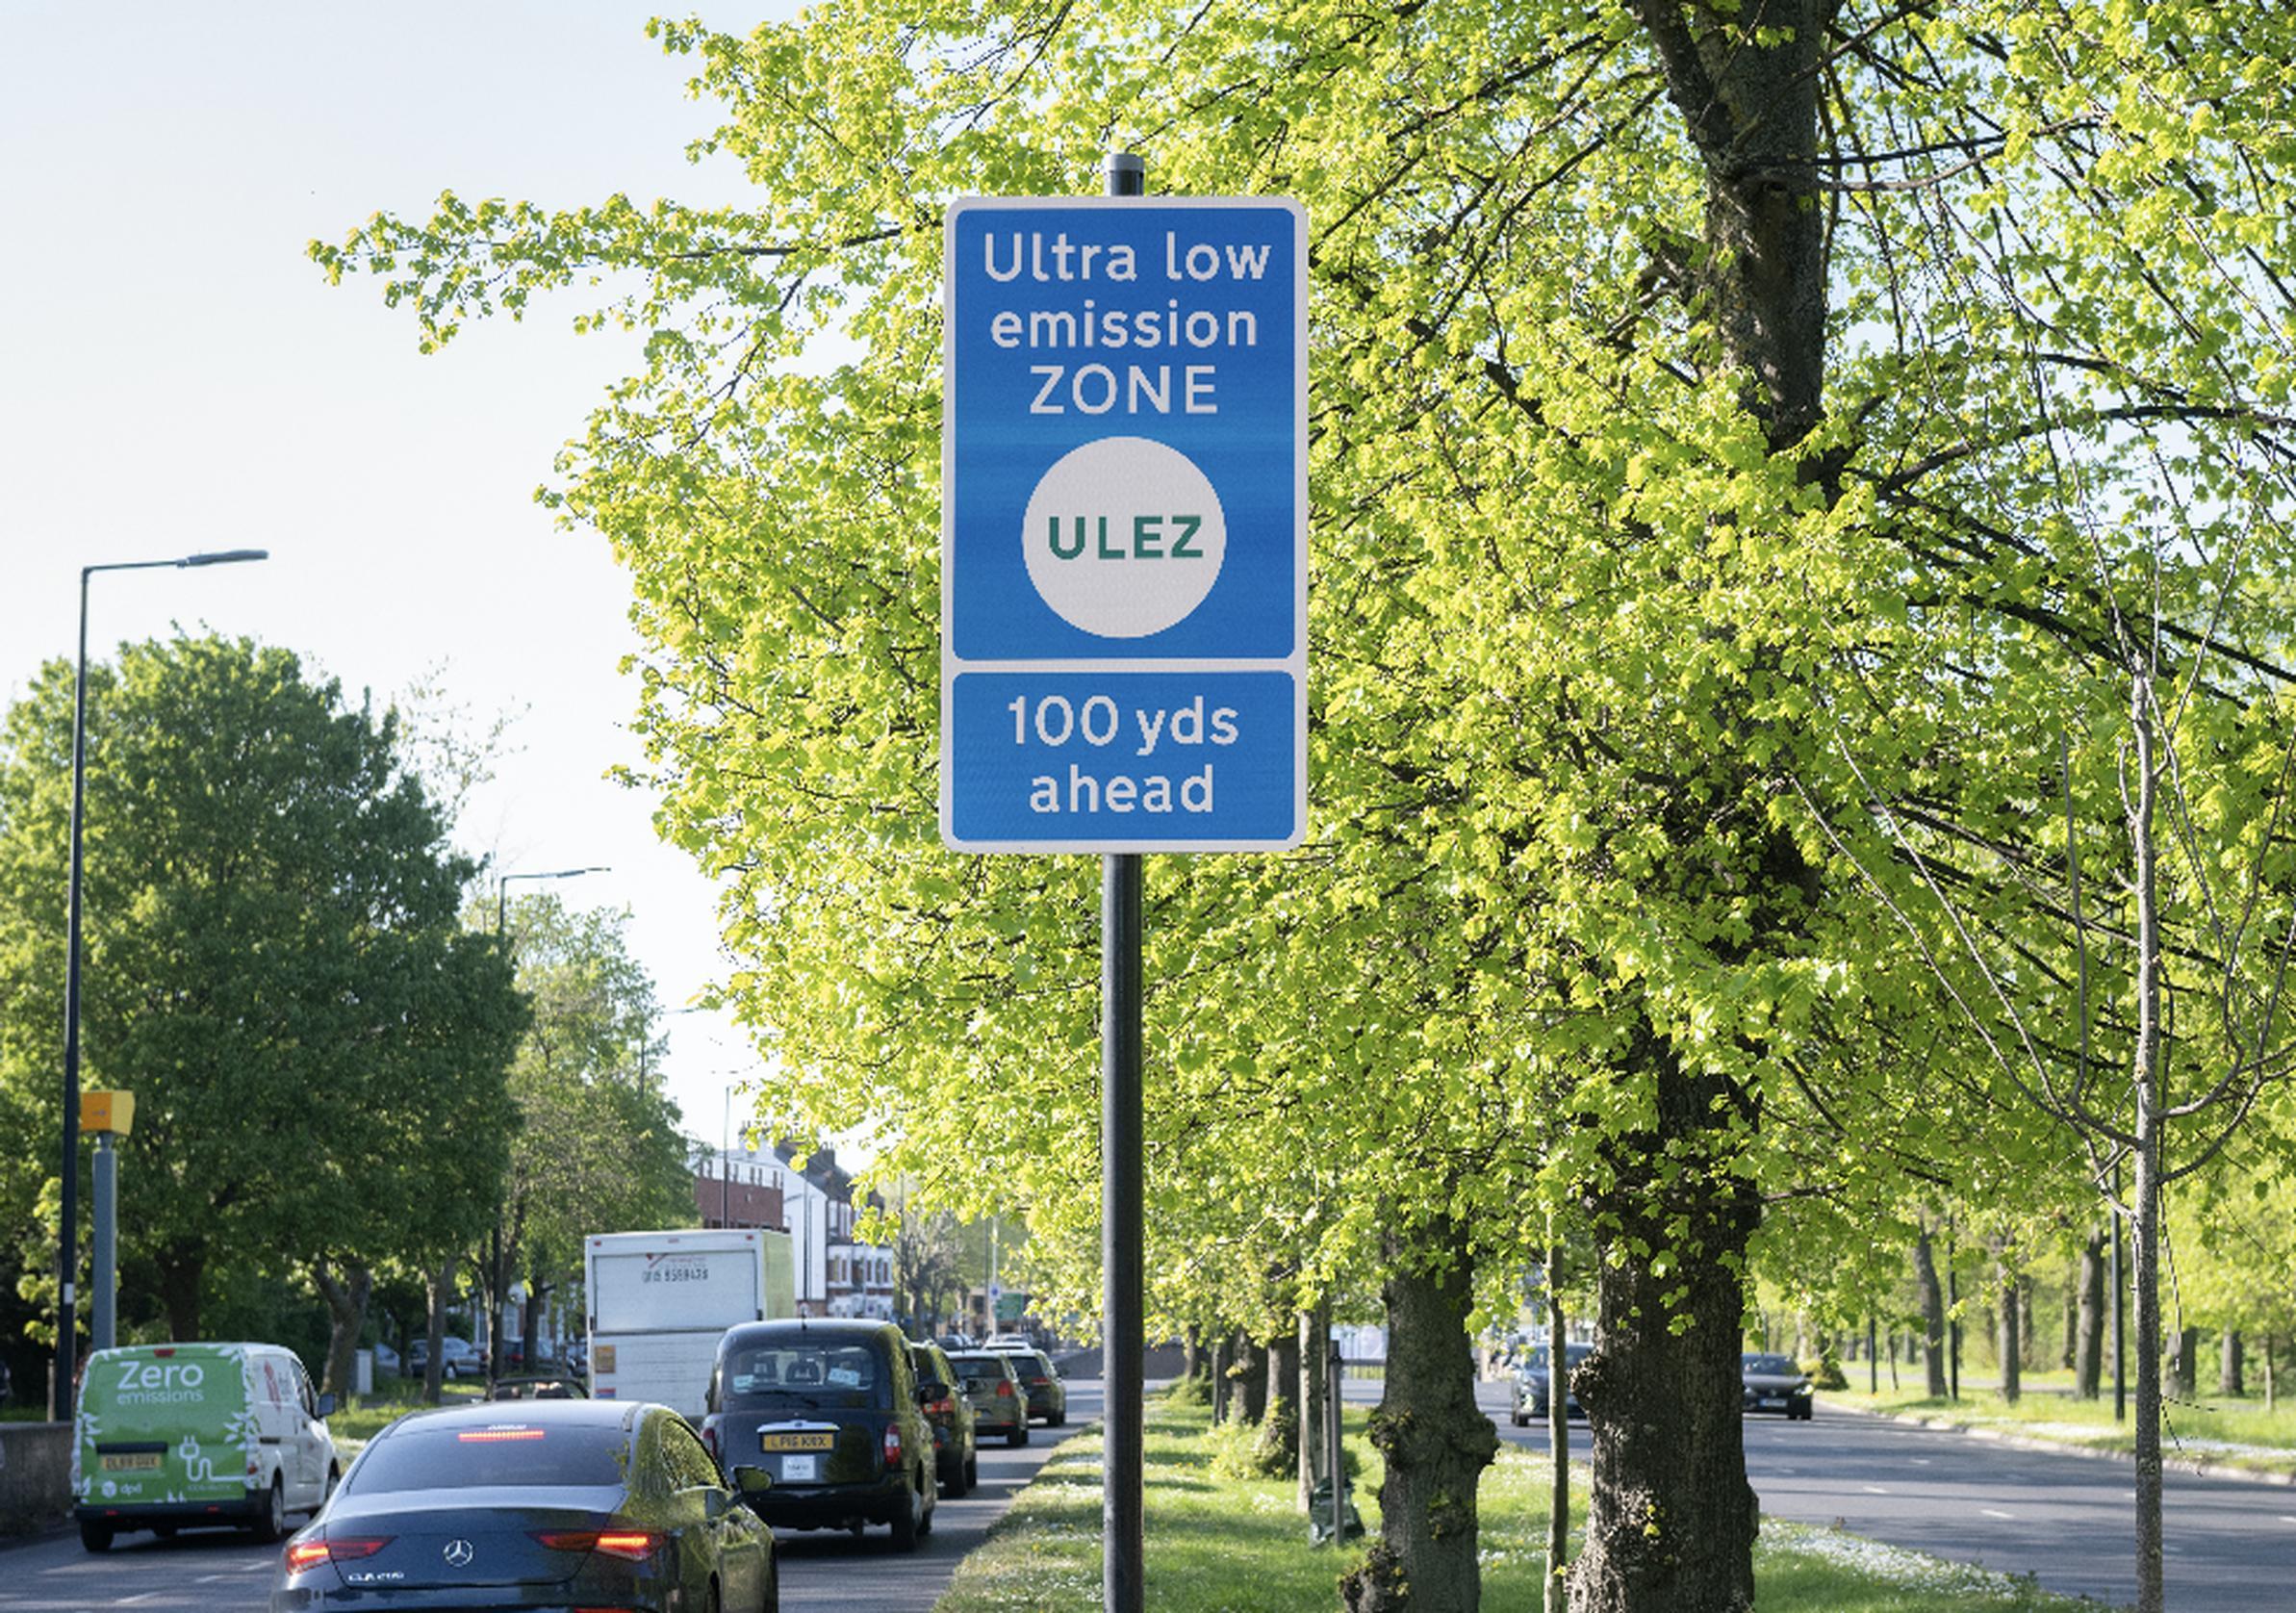 As part of the funding settlement, Sadiq Khan has committed to generating between £500,000 and £1m additional revenue a year through measures such as extending the Ultra Low Emission Zone